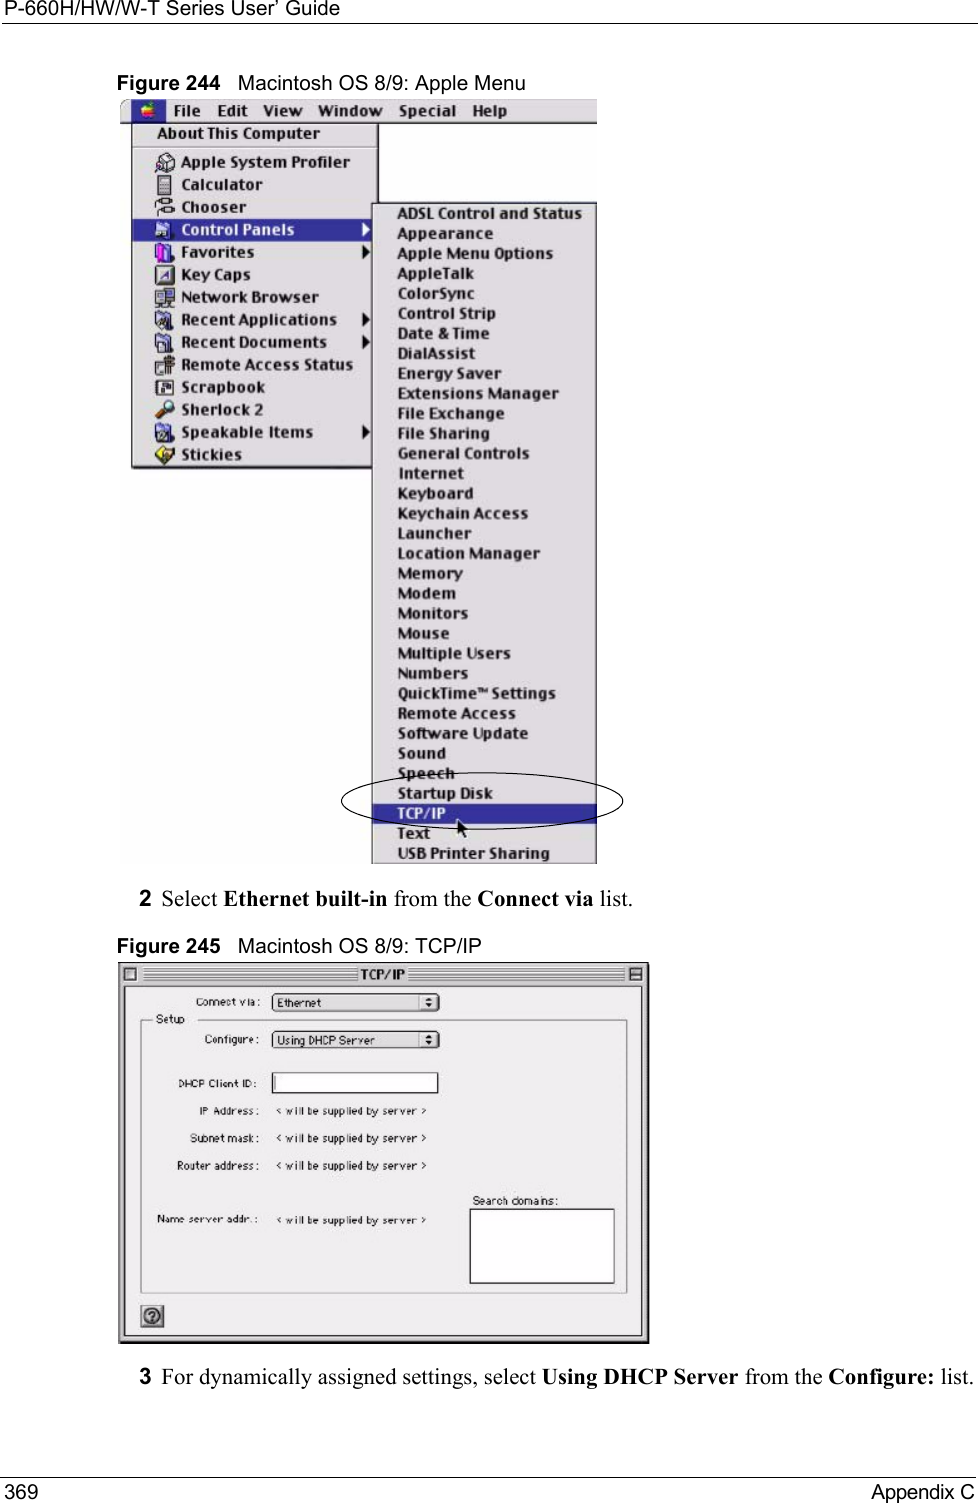 P-660H/HW/W-T Series User’ Guide369 Appendix CFigure 244   Macintosh OS 8/9: Apple Menu2Select Ethernet built-in from the Connect via list.Figure 245   Macintosh OS 8/9: TCP/IP3For dynamically assigned settings, select Using DHCP Server from the Configure: list.